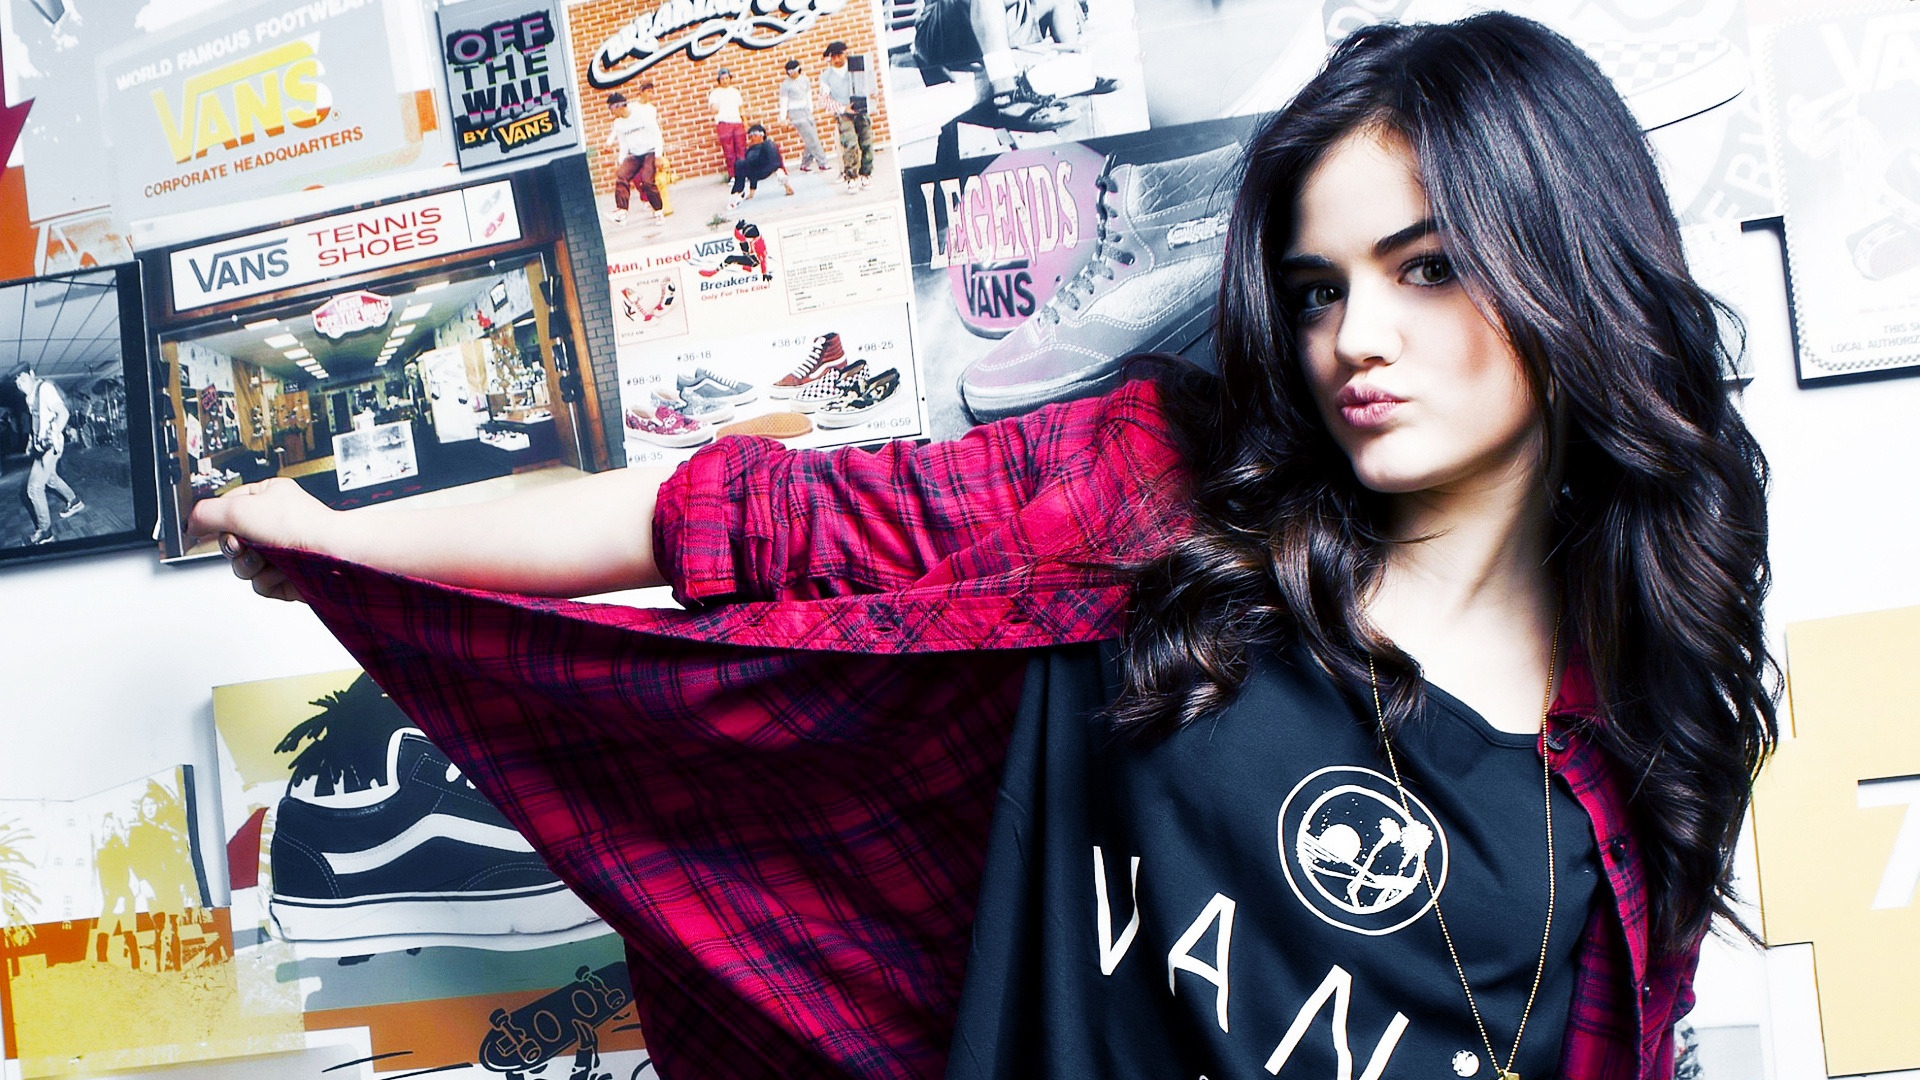 Lucy Hale for 1920 x 1080 HDTV 1080p resolution